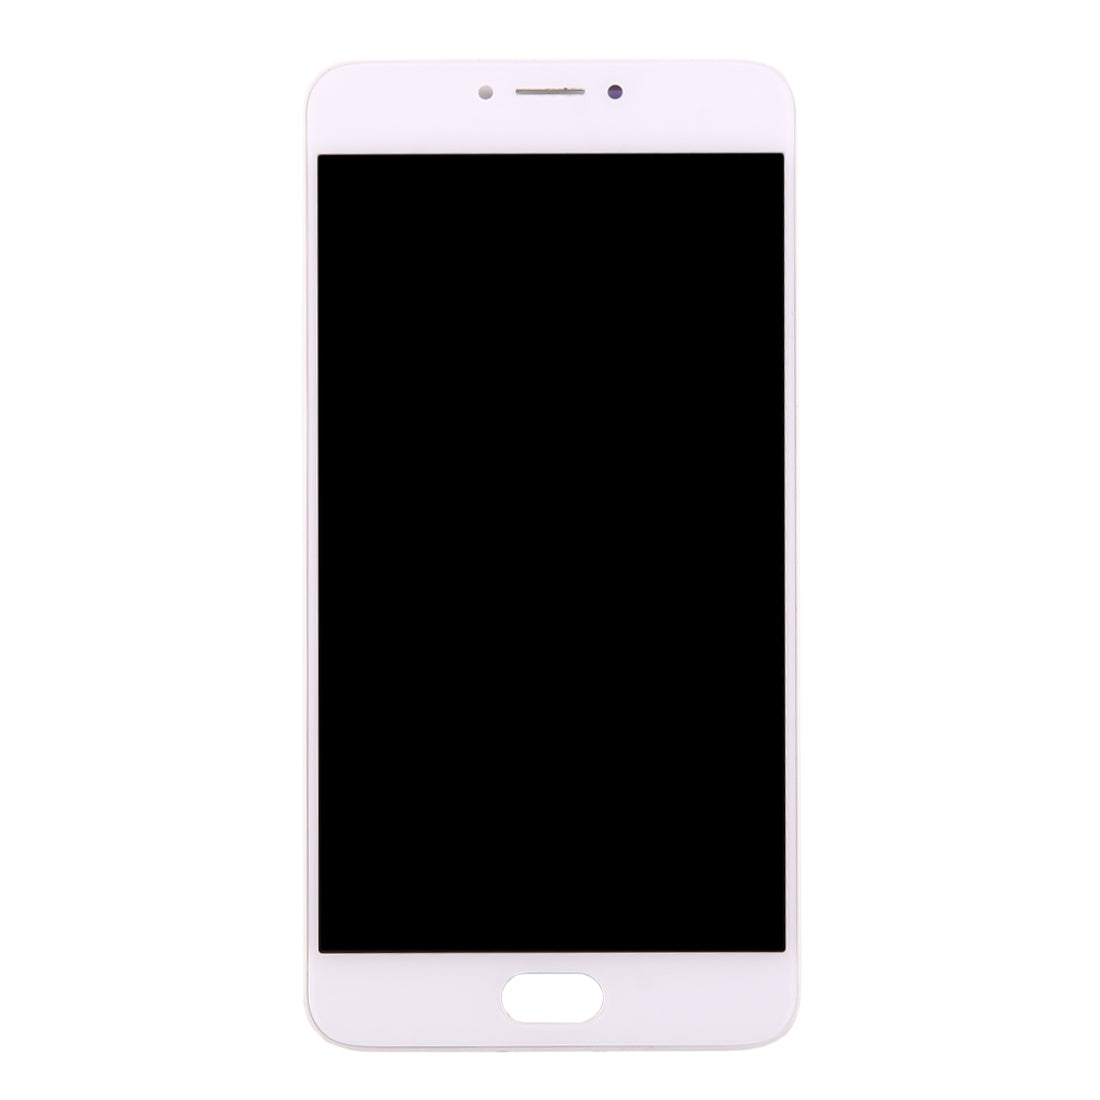 LCD Screen + Touch + Frame Meizu M3 Note Meilan Note 3 (Chinese Version) White